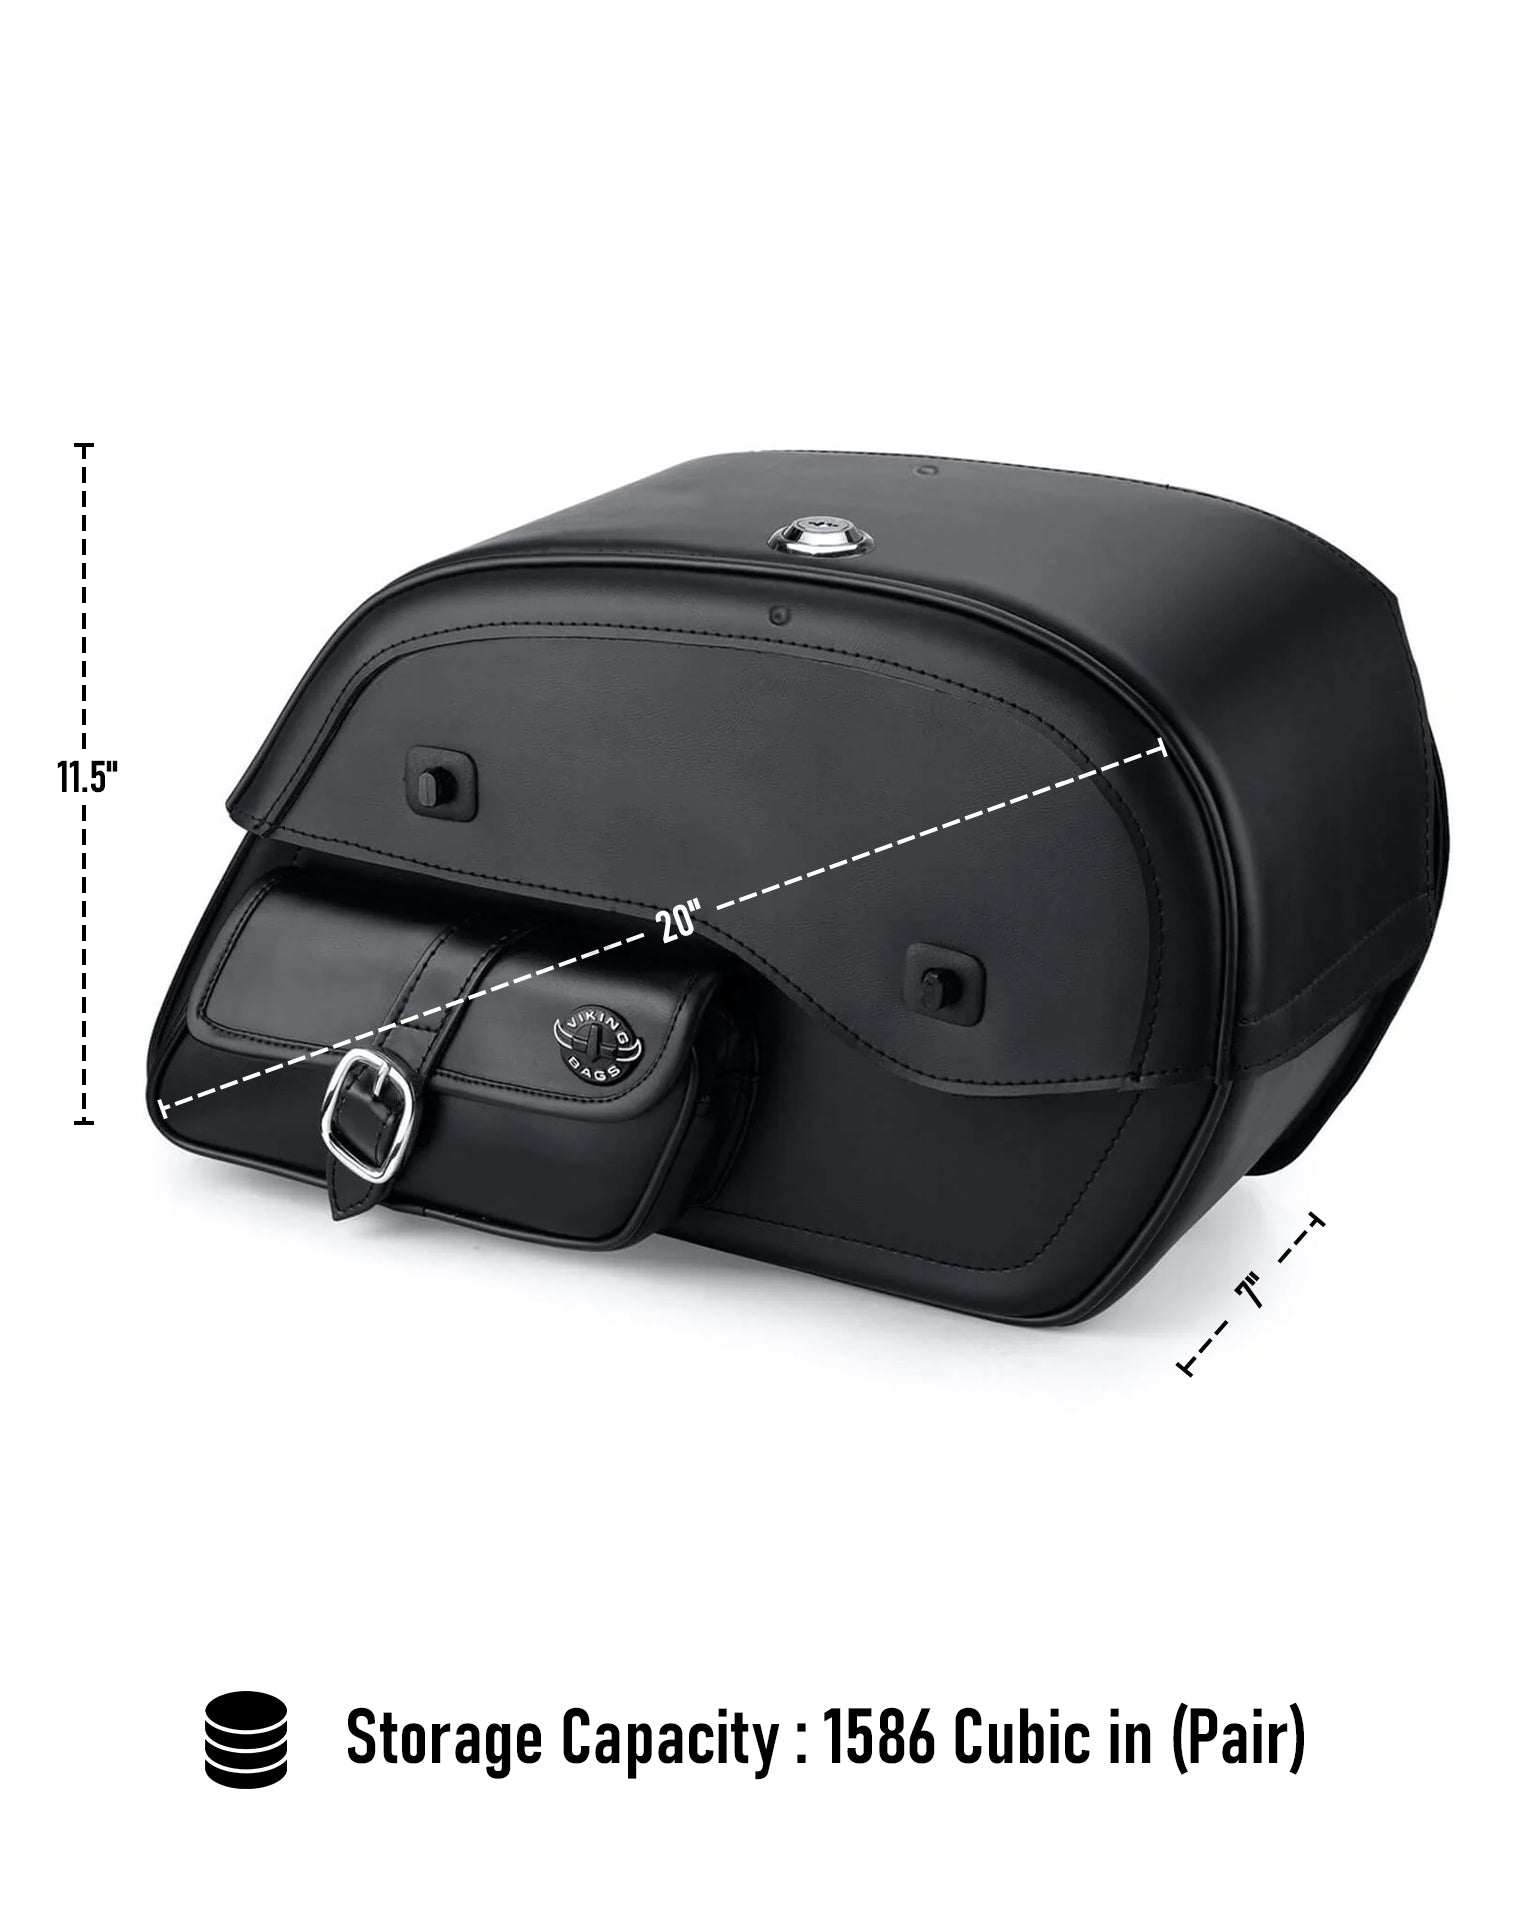 Viking Essential Side Pocket Large Shock Cutout Leather Motorcycle Saddlebags For Harley Sportster 883 Custom Xl883C Xlh883C Can Store Your Ridings Gears